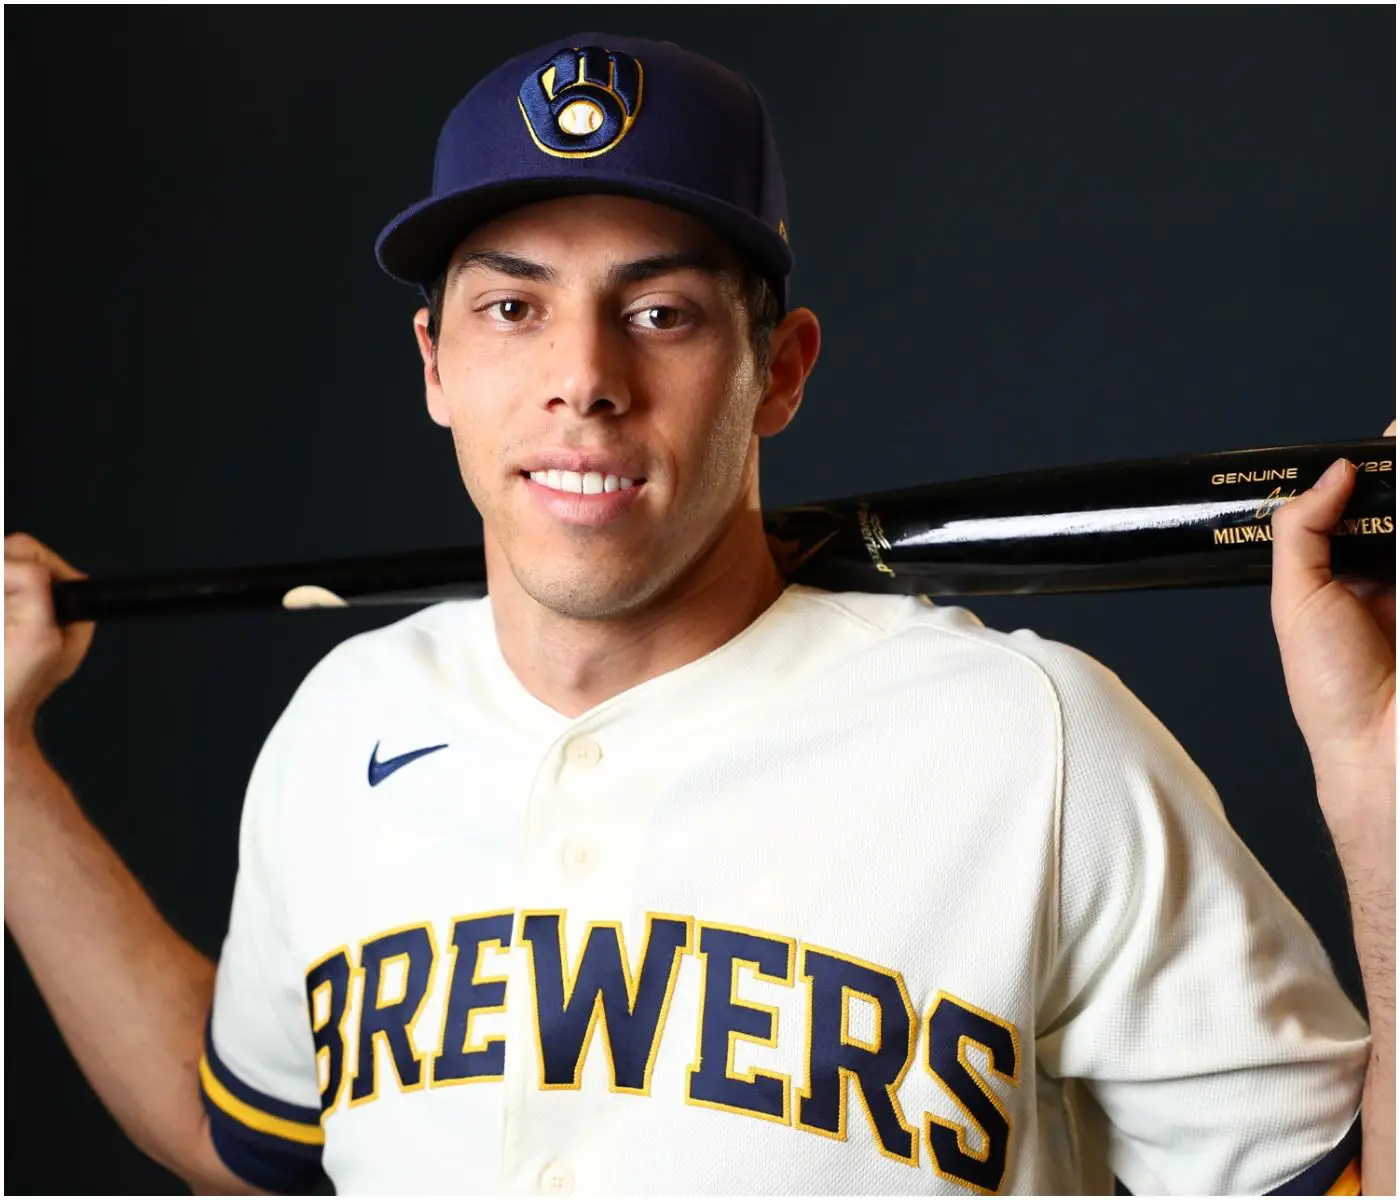 what is the net worth of Christian Yelich